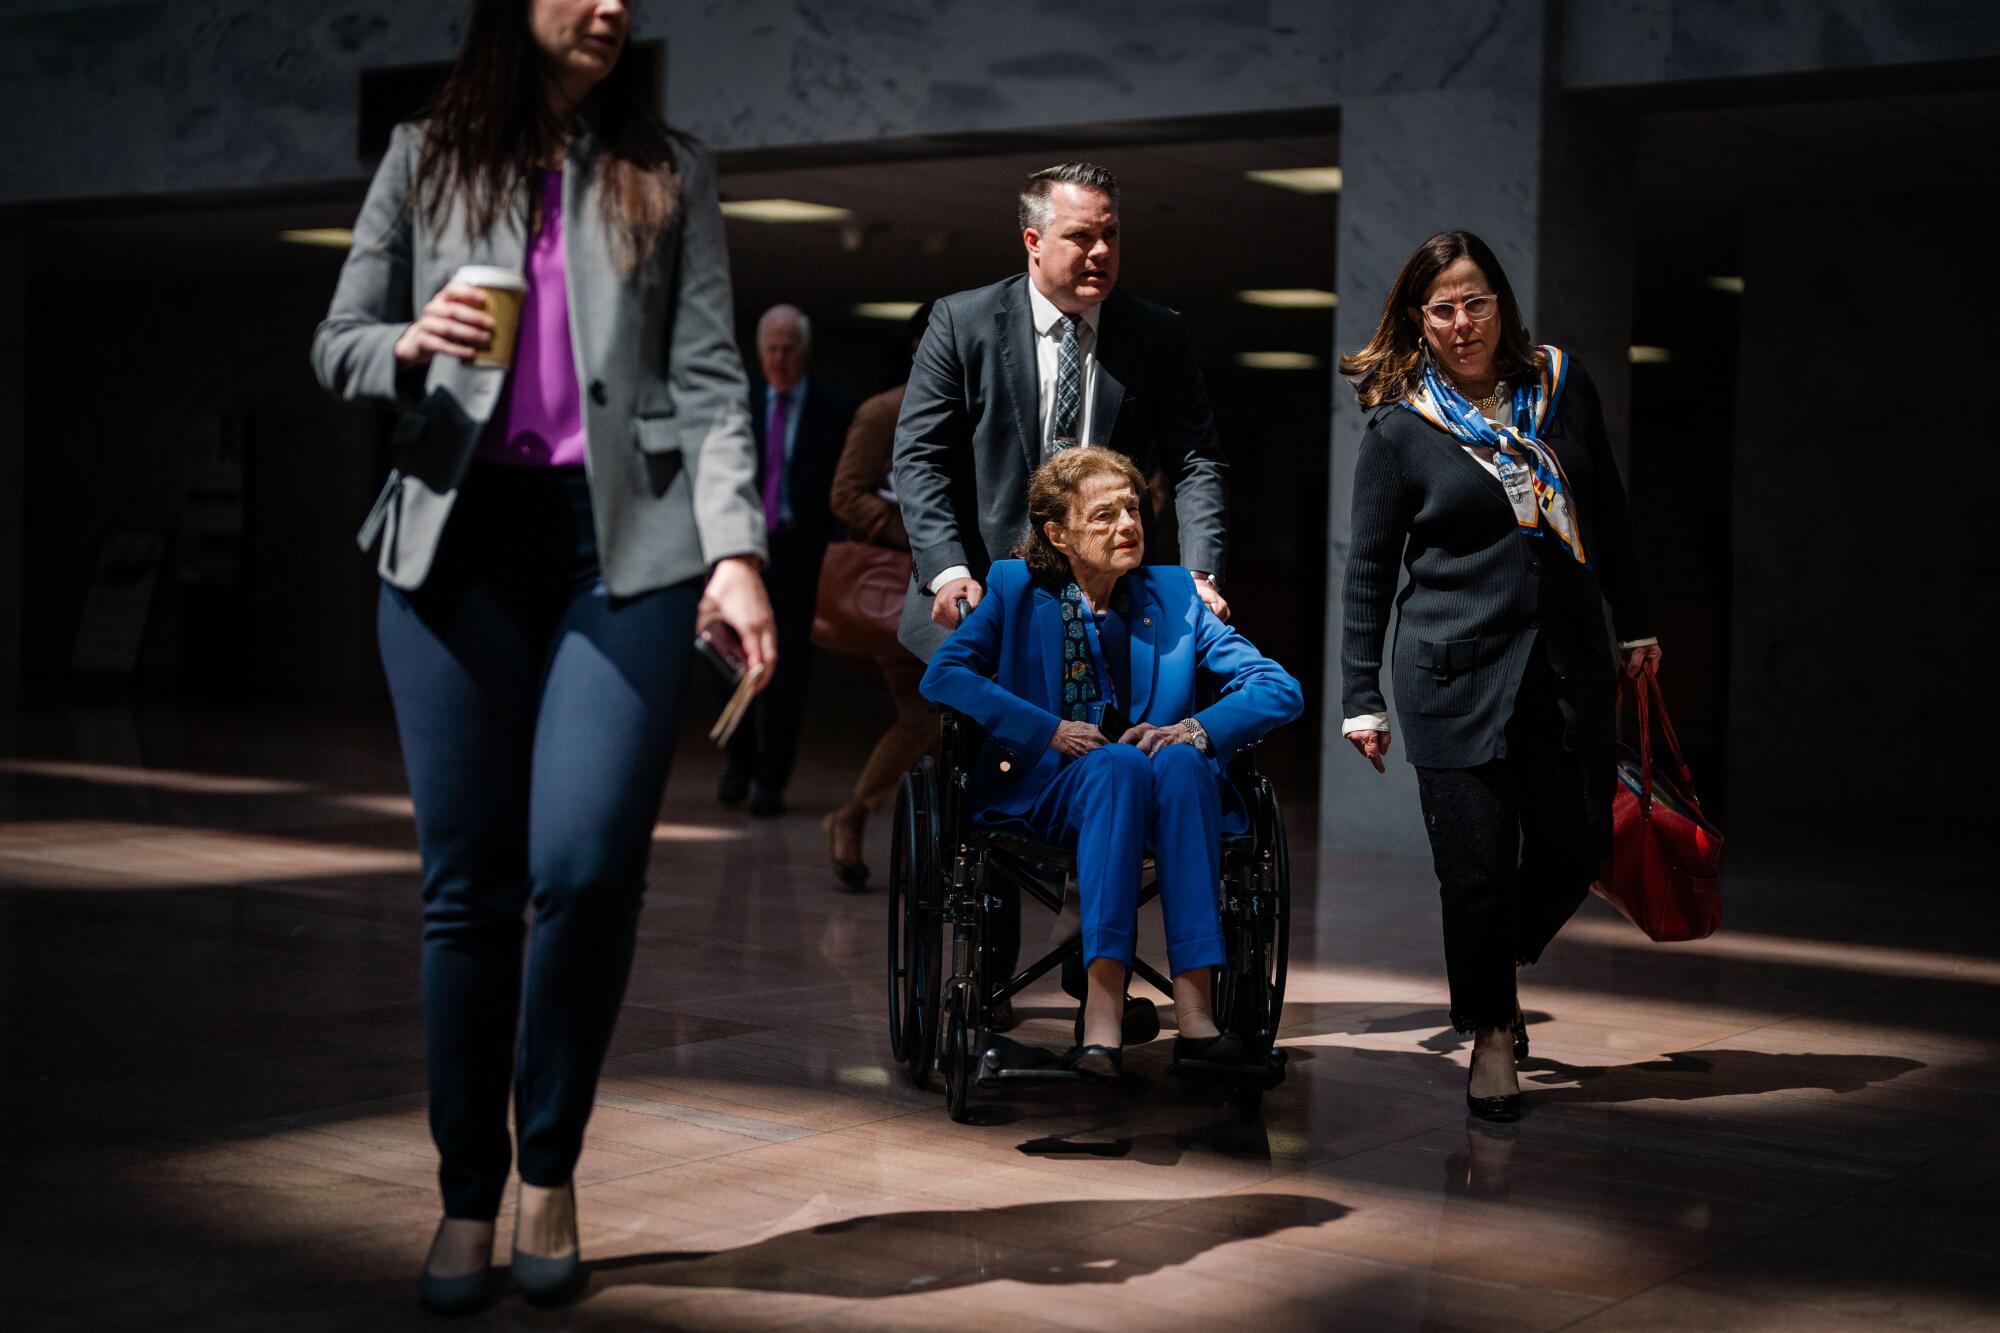 Sen. Dianne Feinstein heads to a meeting on May 18 in Washington.